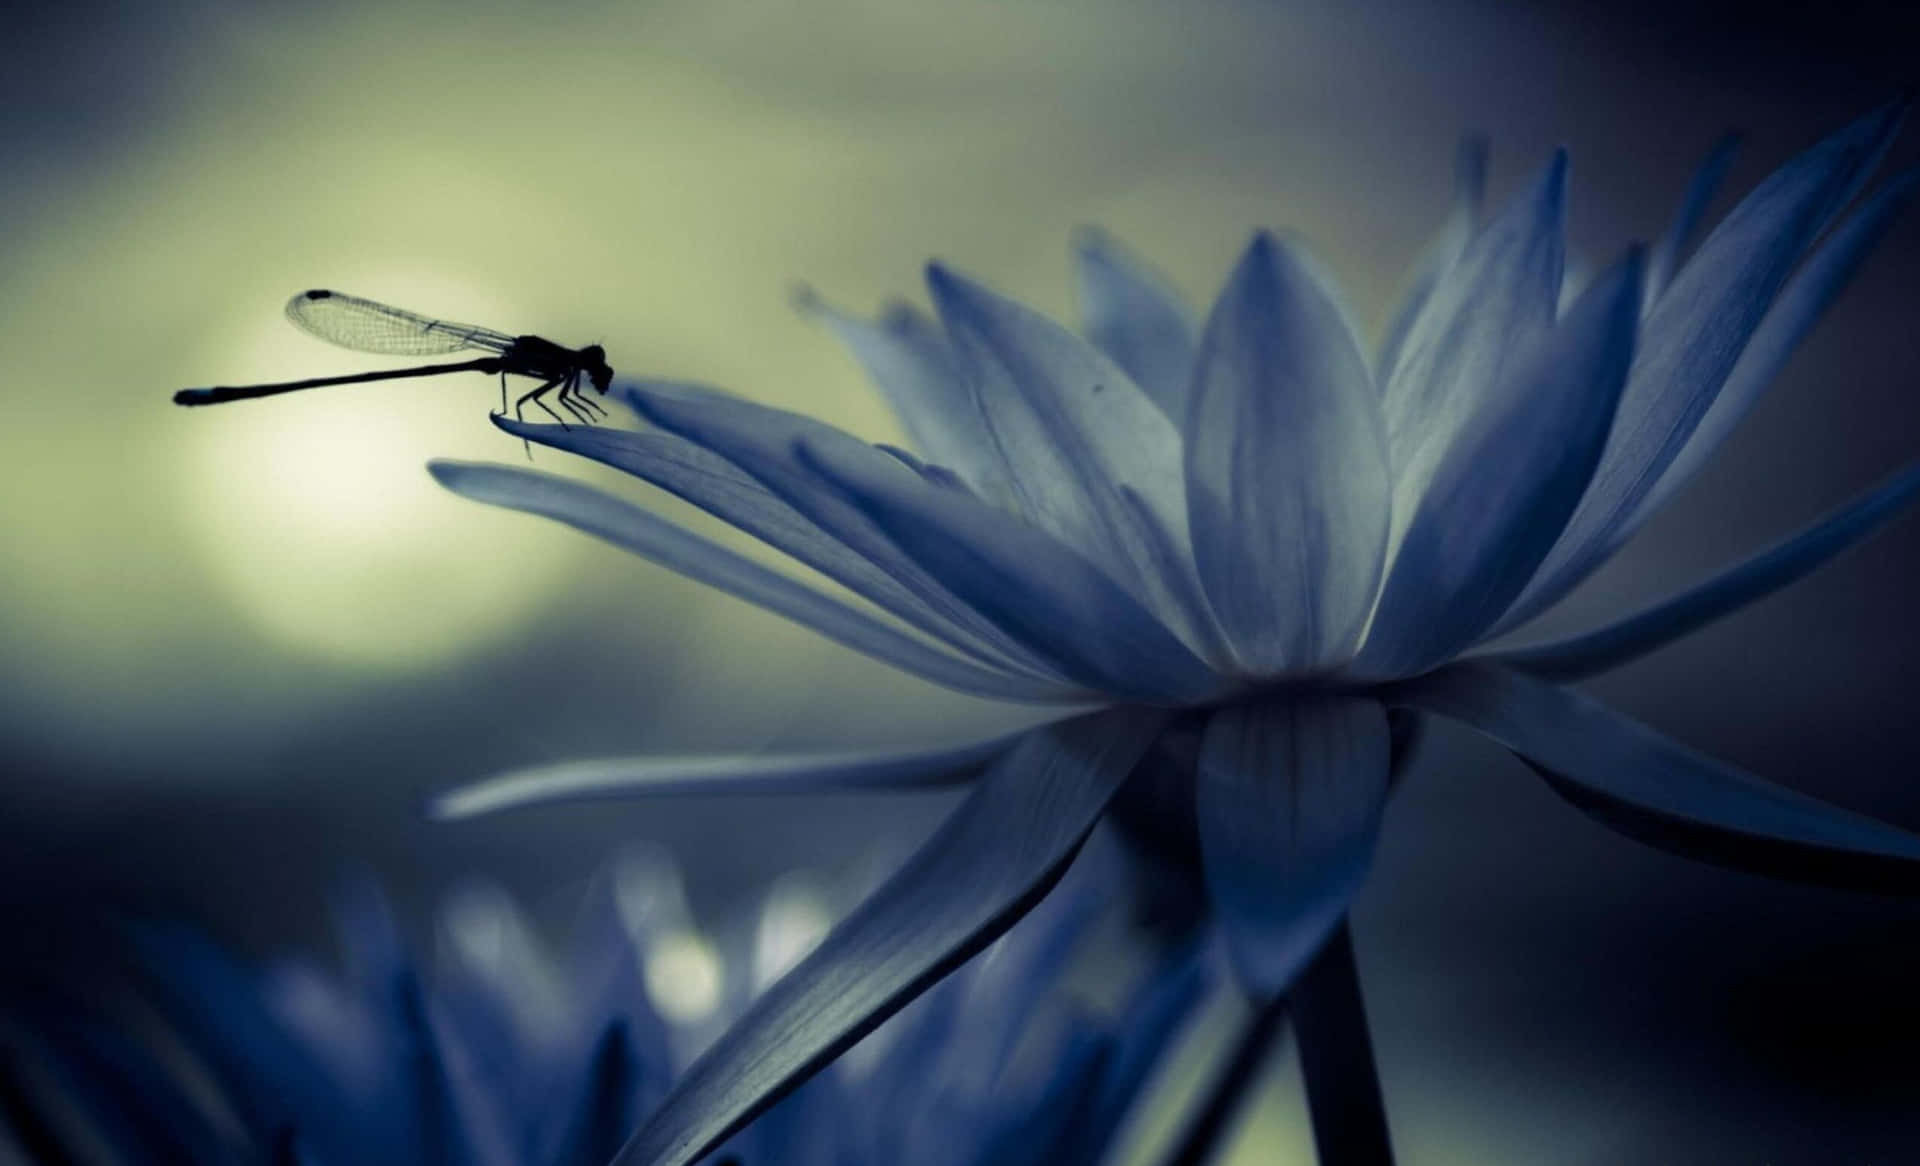 "A beautiful blue Dragonfly perched on a leaf over a reflective lake."